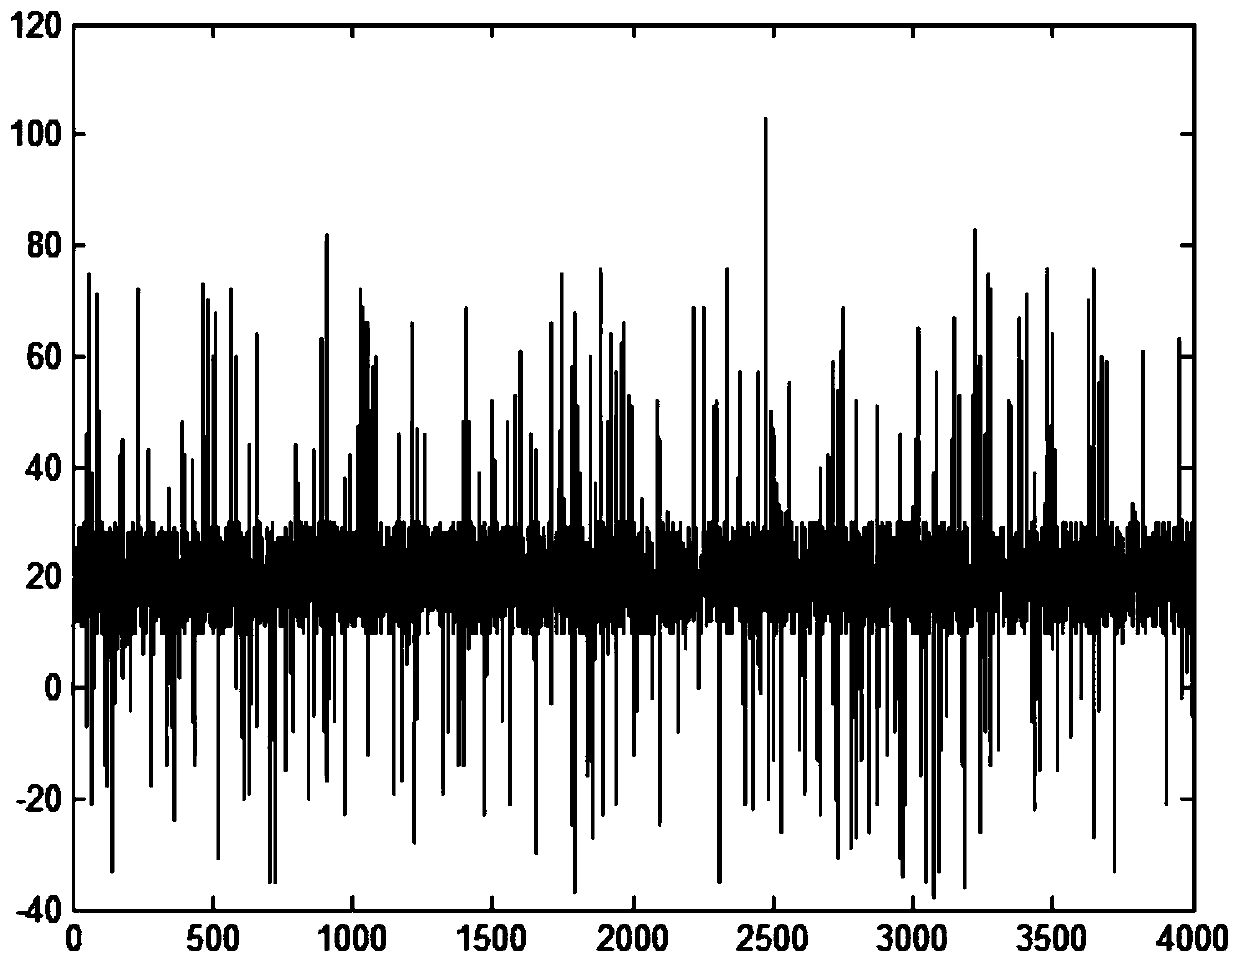 A Random Noise Filtering Method for Specific Signals